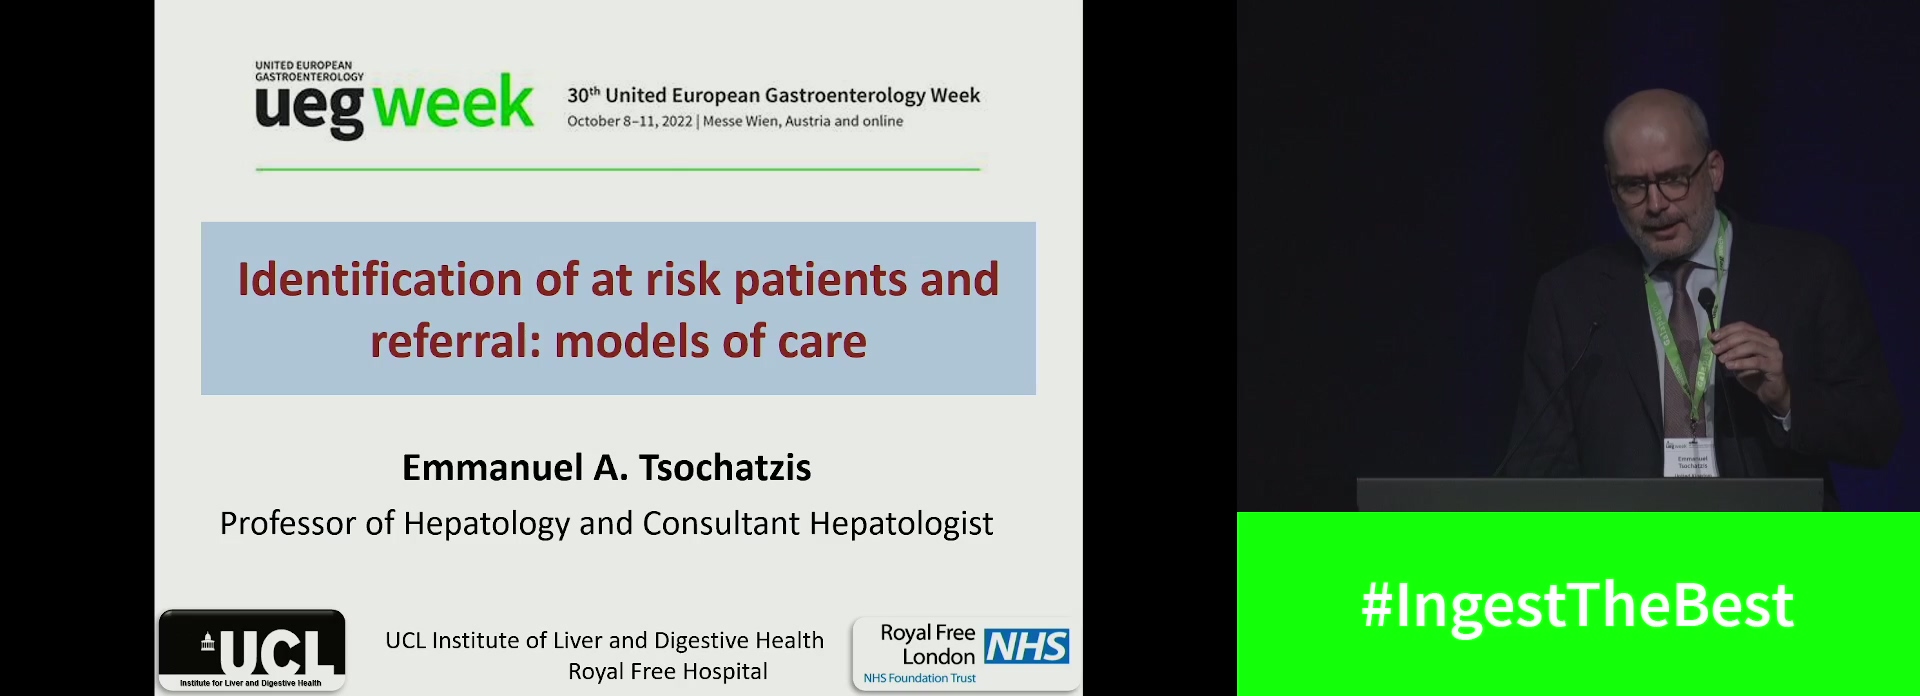 Identification of at risk patients and referal: Models of care